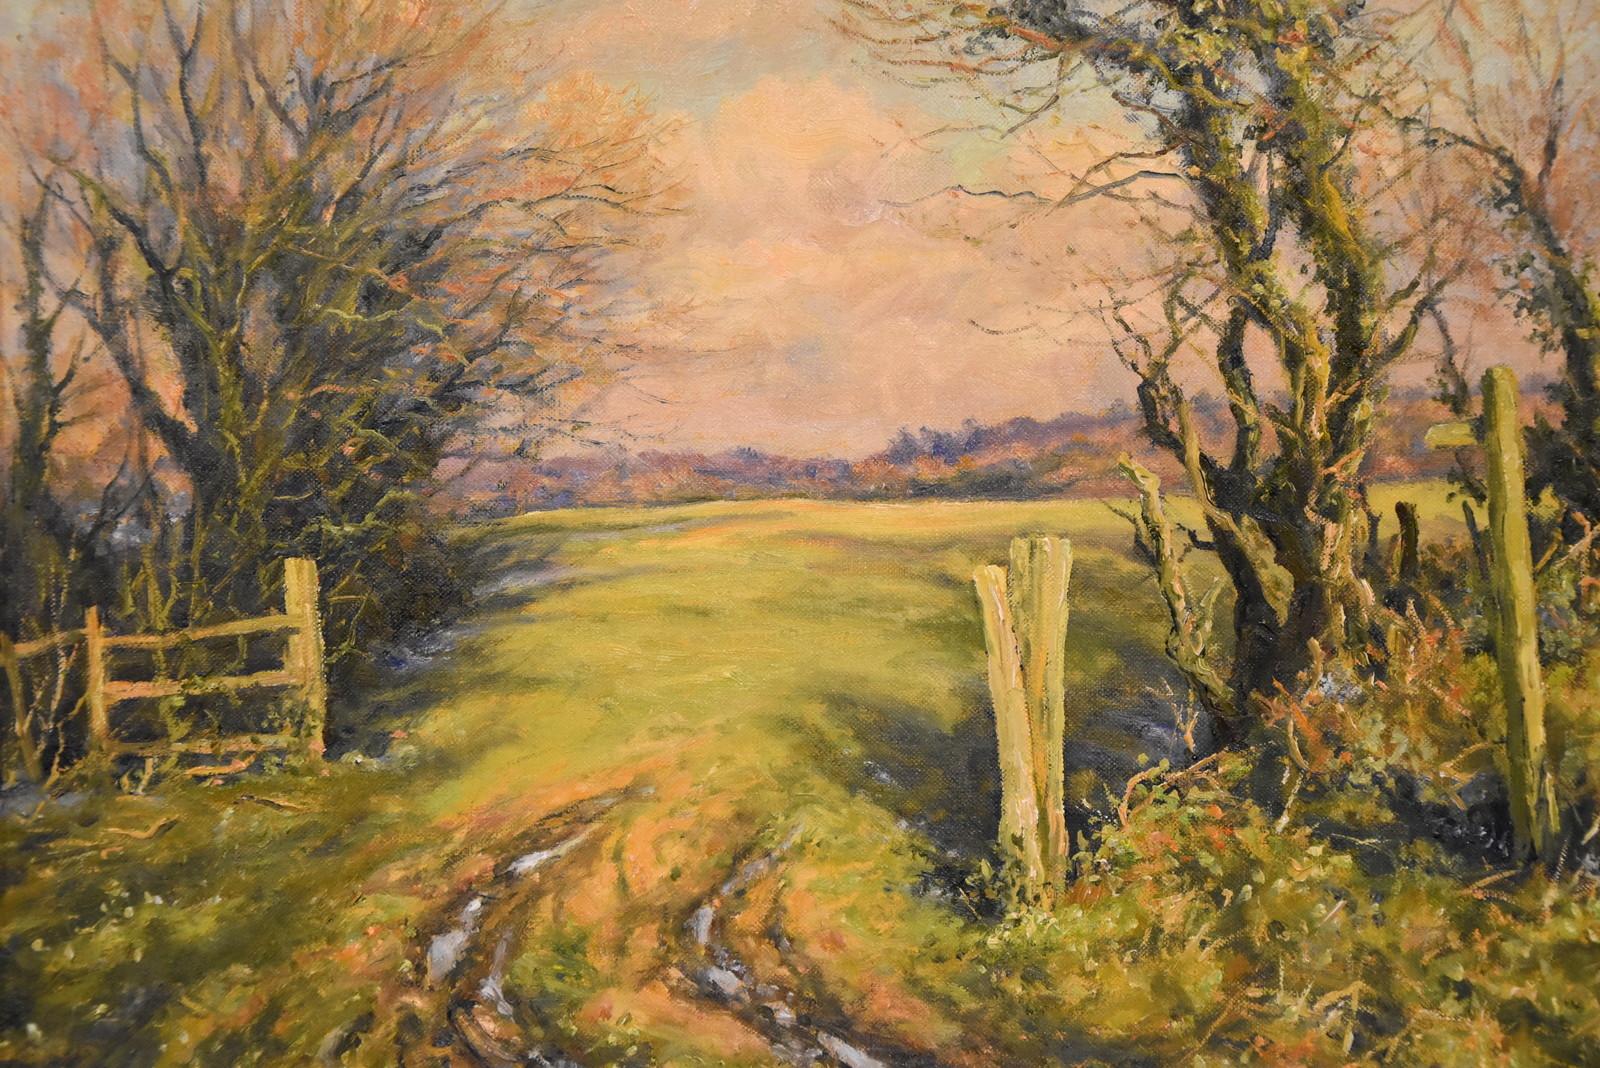 “Old Gateposts, Winter Evening Light” by Mervyn Goode. Mervyn Goode born 1948 he studied at the Gloucestershire college of Art and never looked back after his first one man sell-out exhibition in London in 1970. Oil on canvas

Dimensions